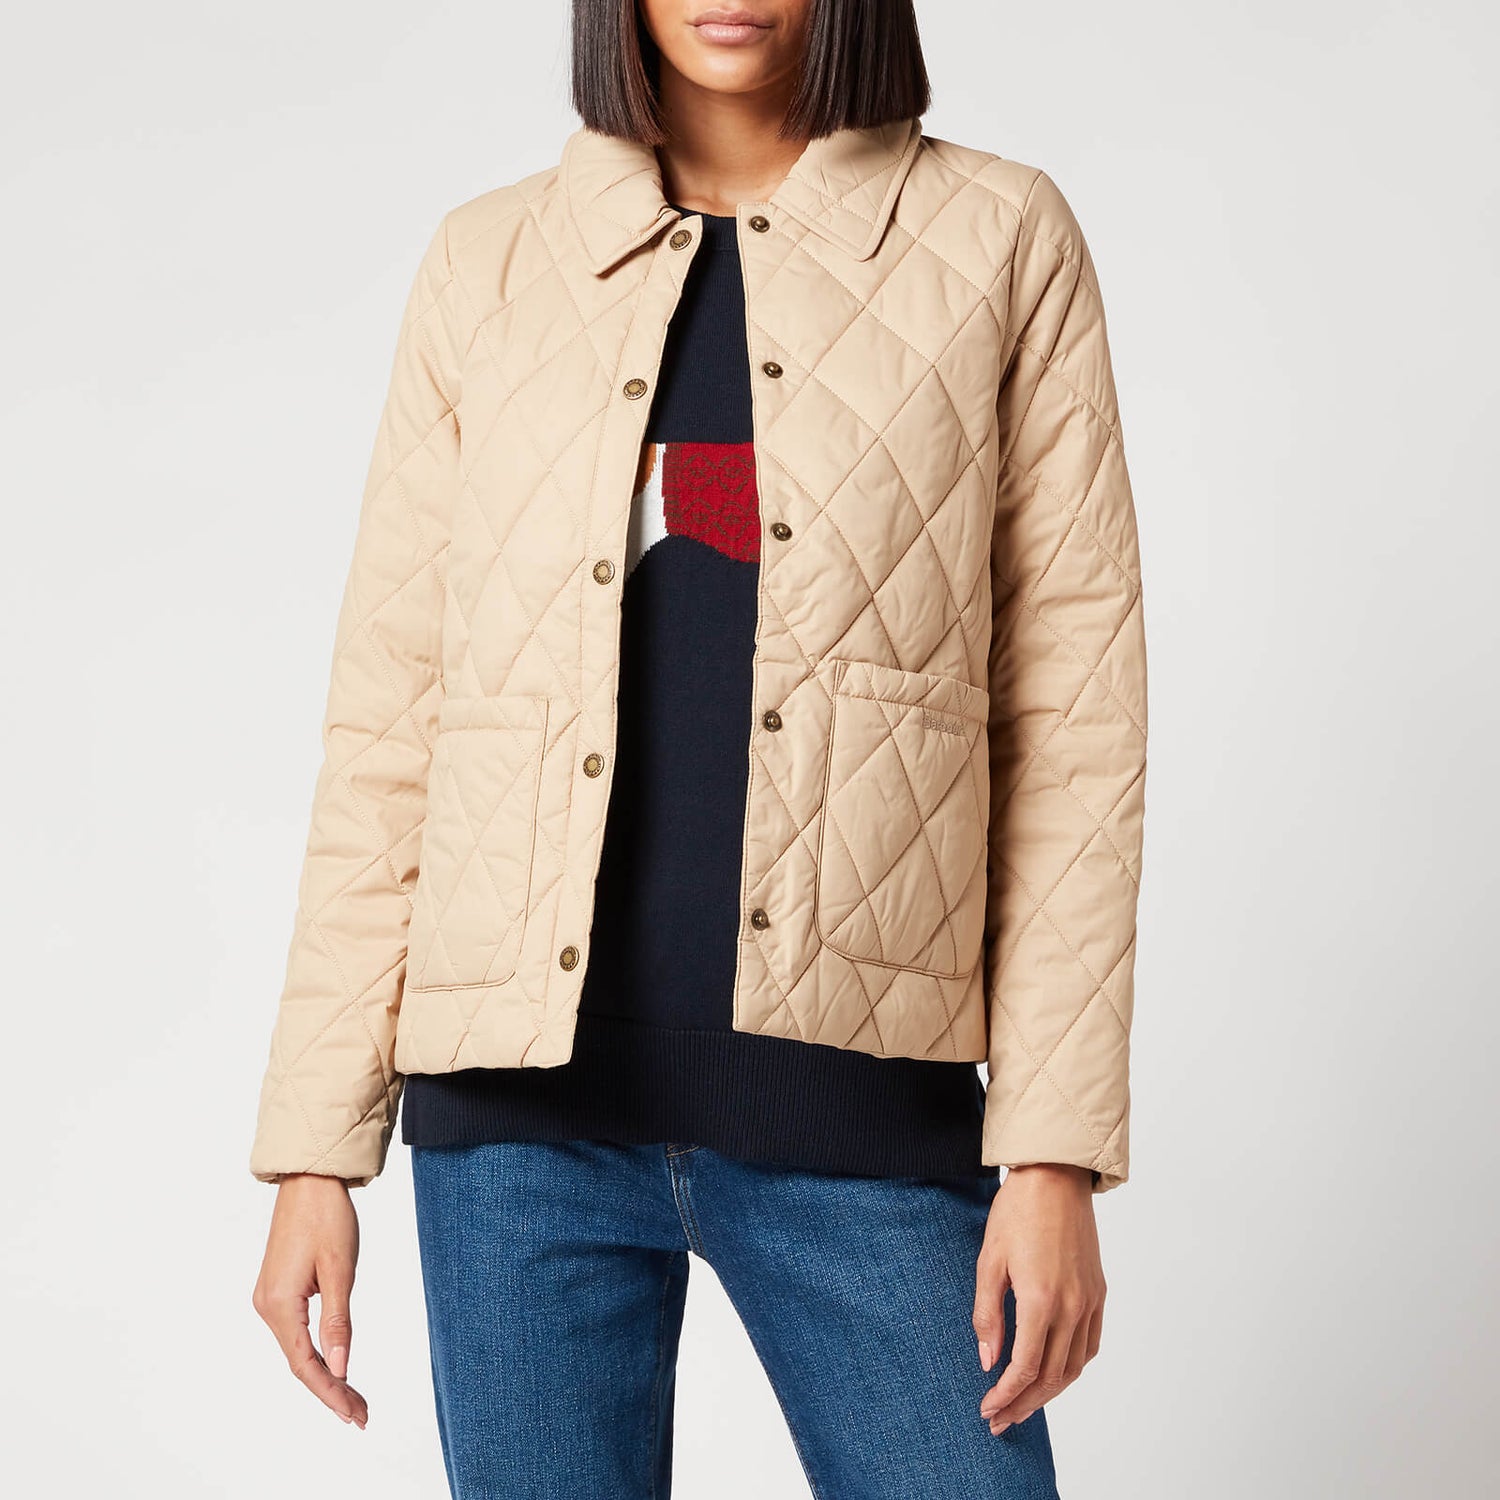 Barbour Women's Colliford Quilted Jacket - Dk Stone